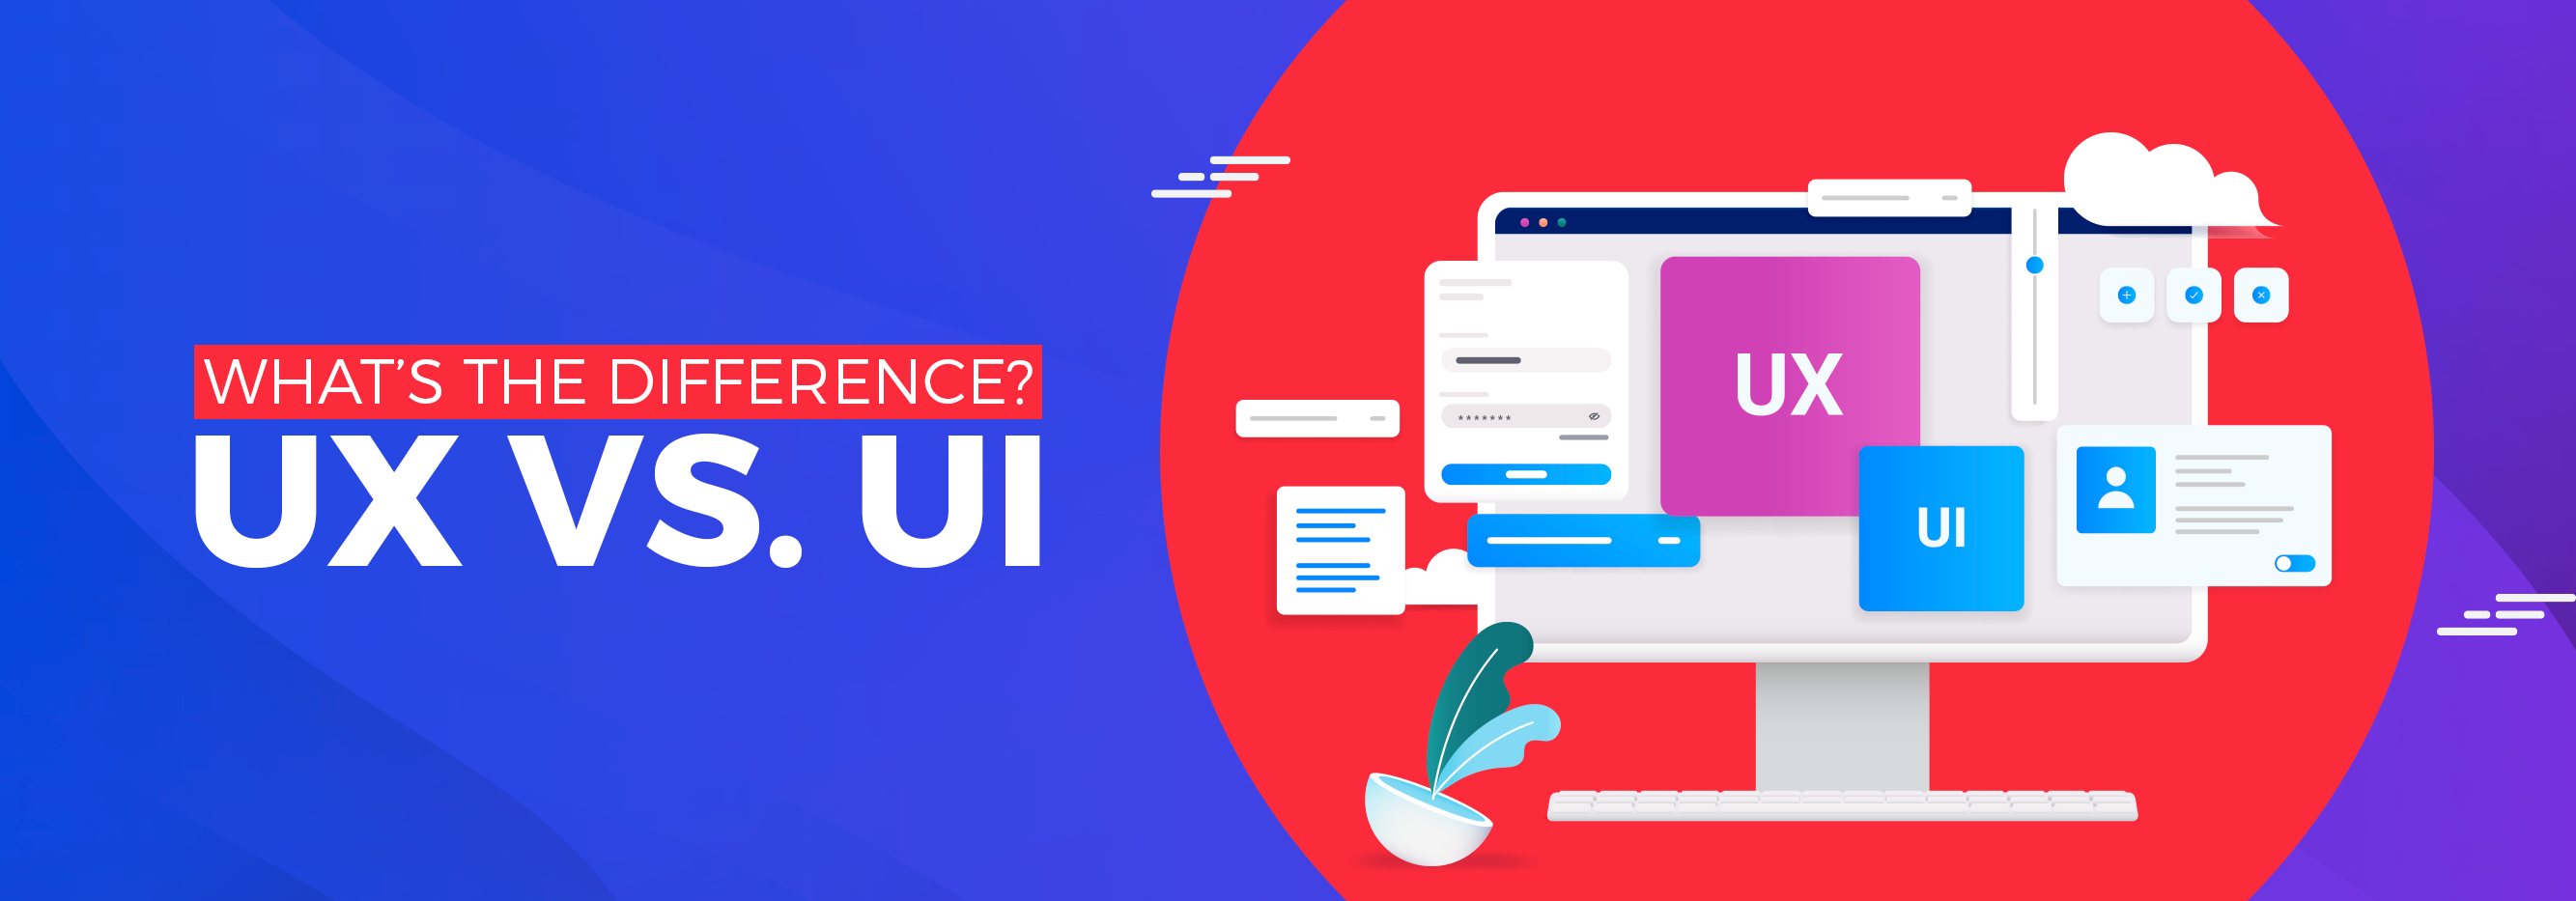 UX vs. UI What’s The Difference_banner